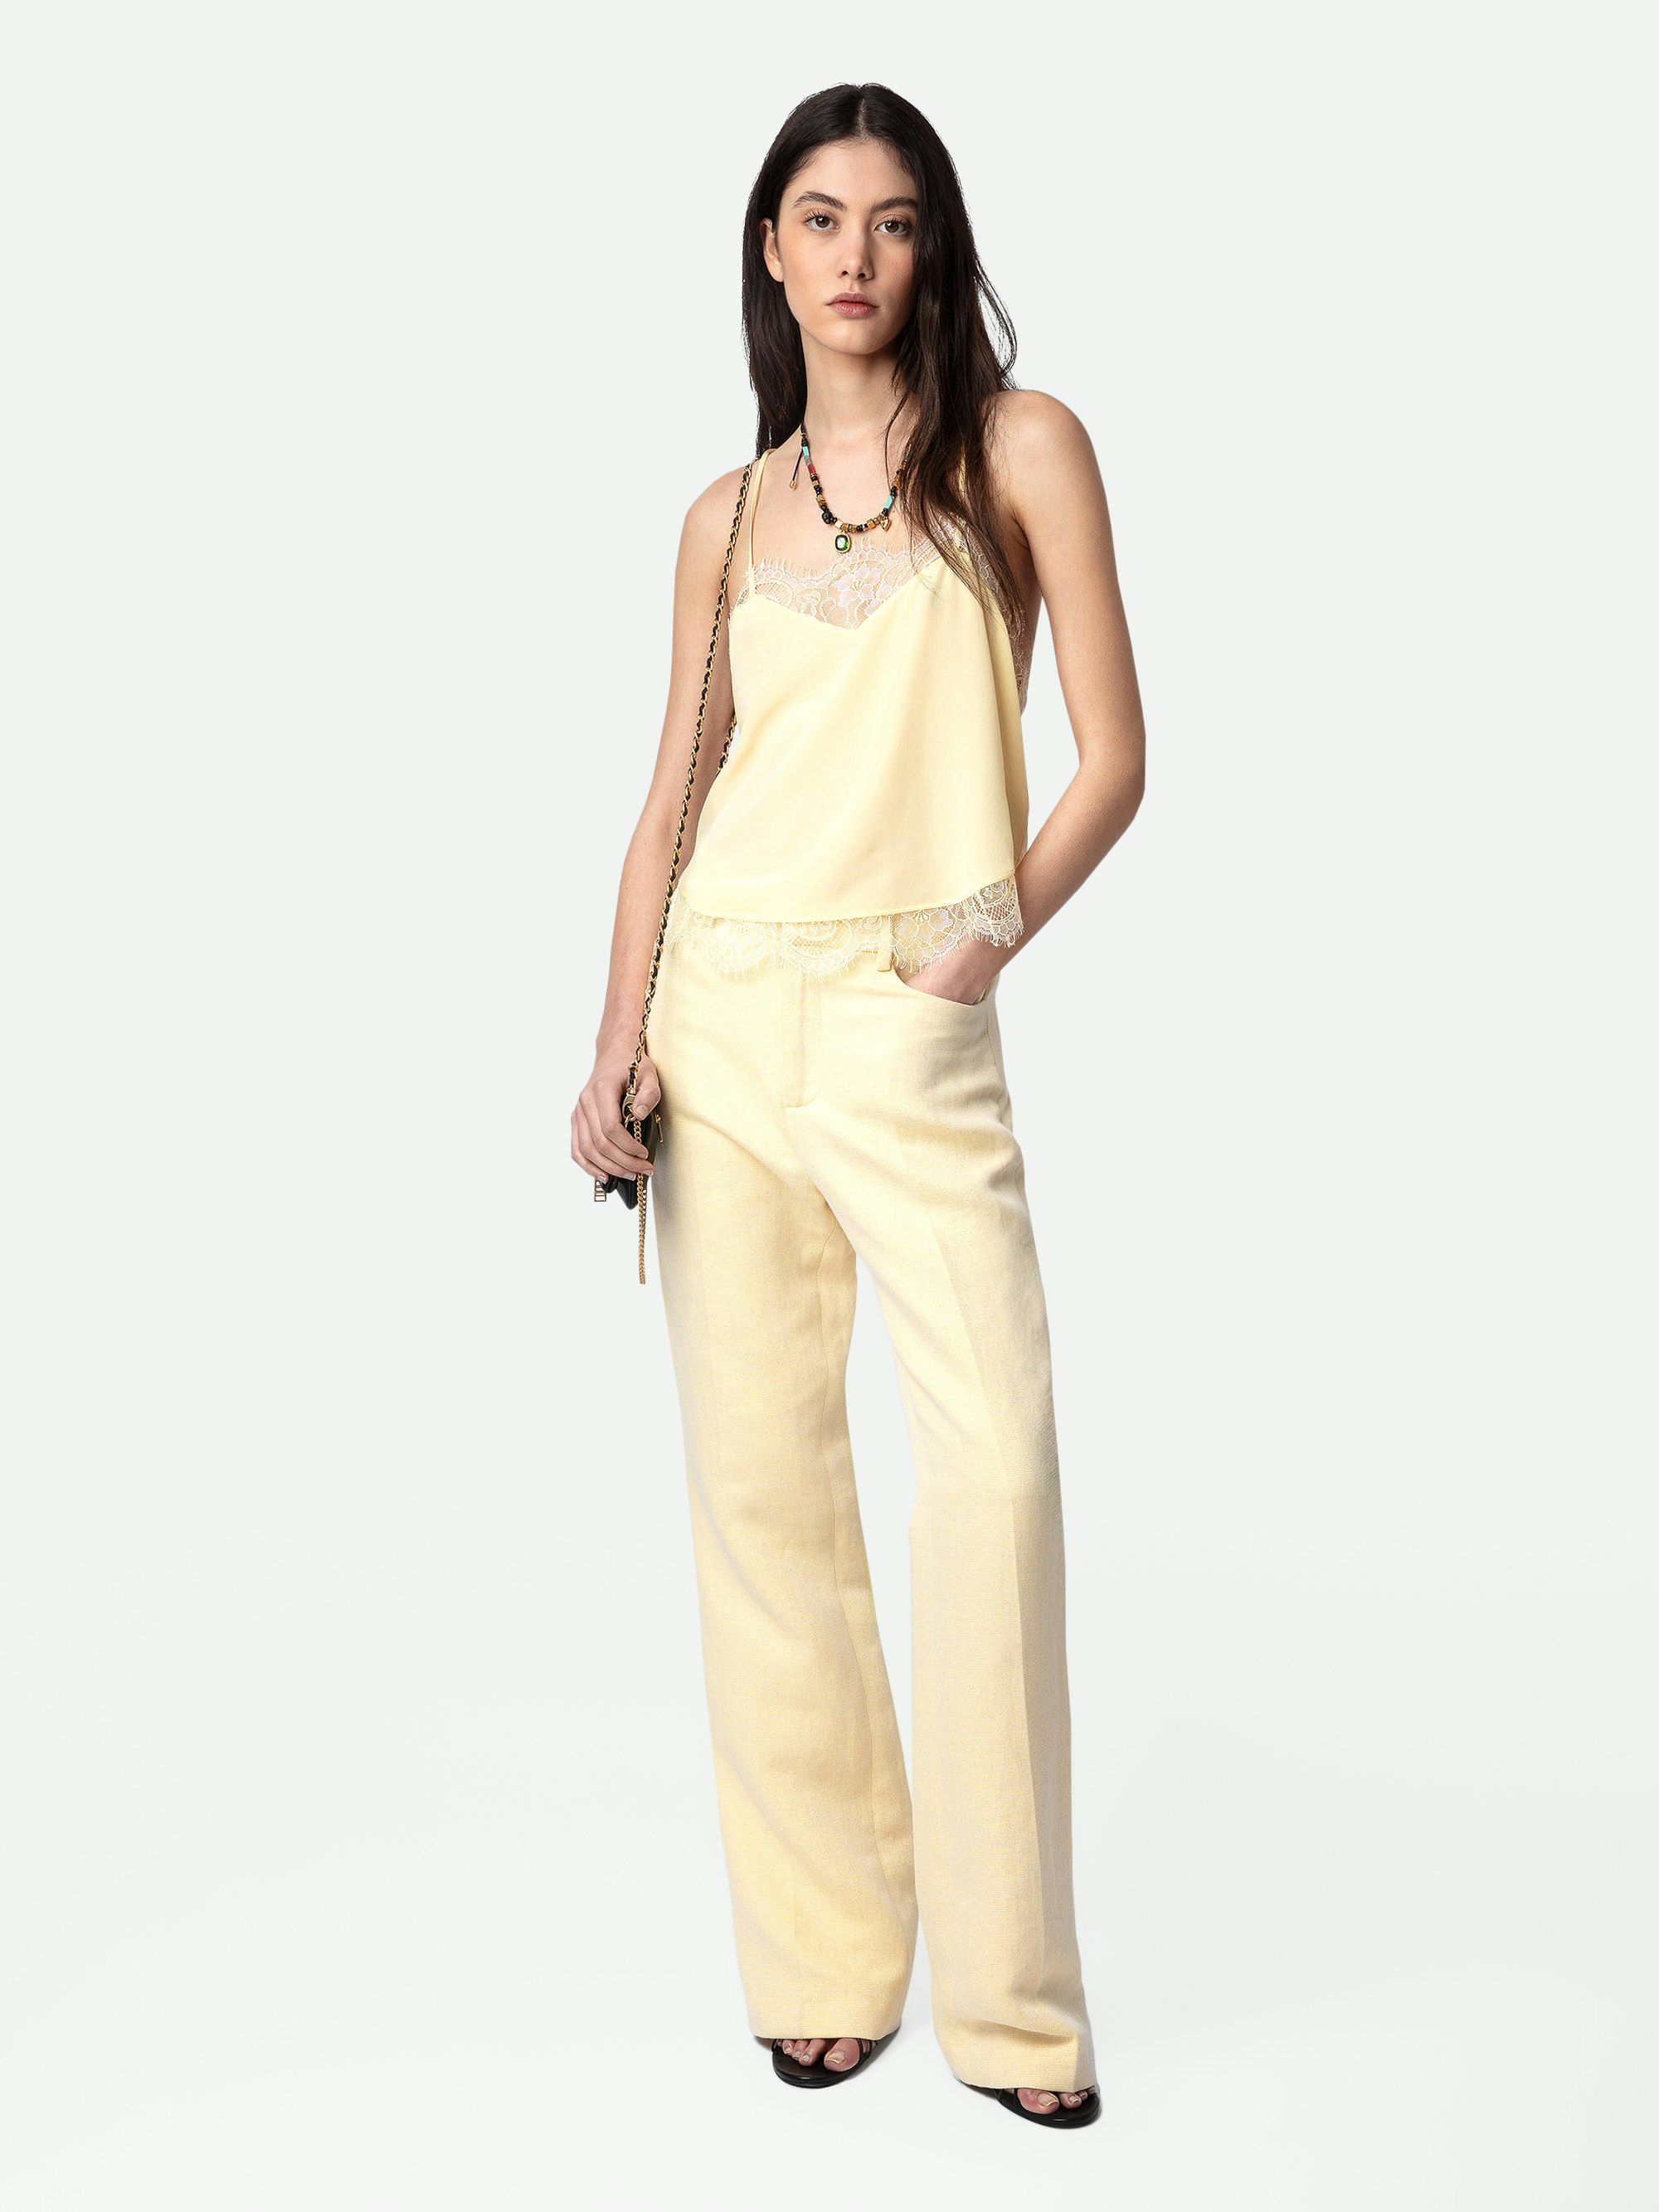 Pistol Pants - Light yellow linen flared tailored pants with pockets and pleats.